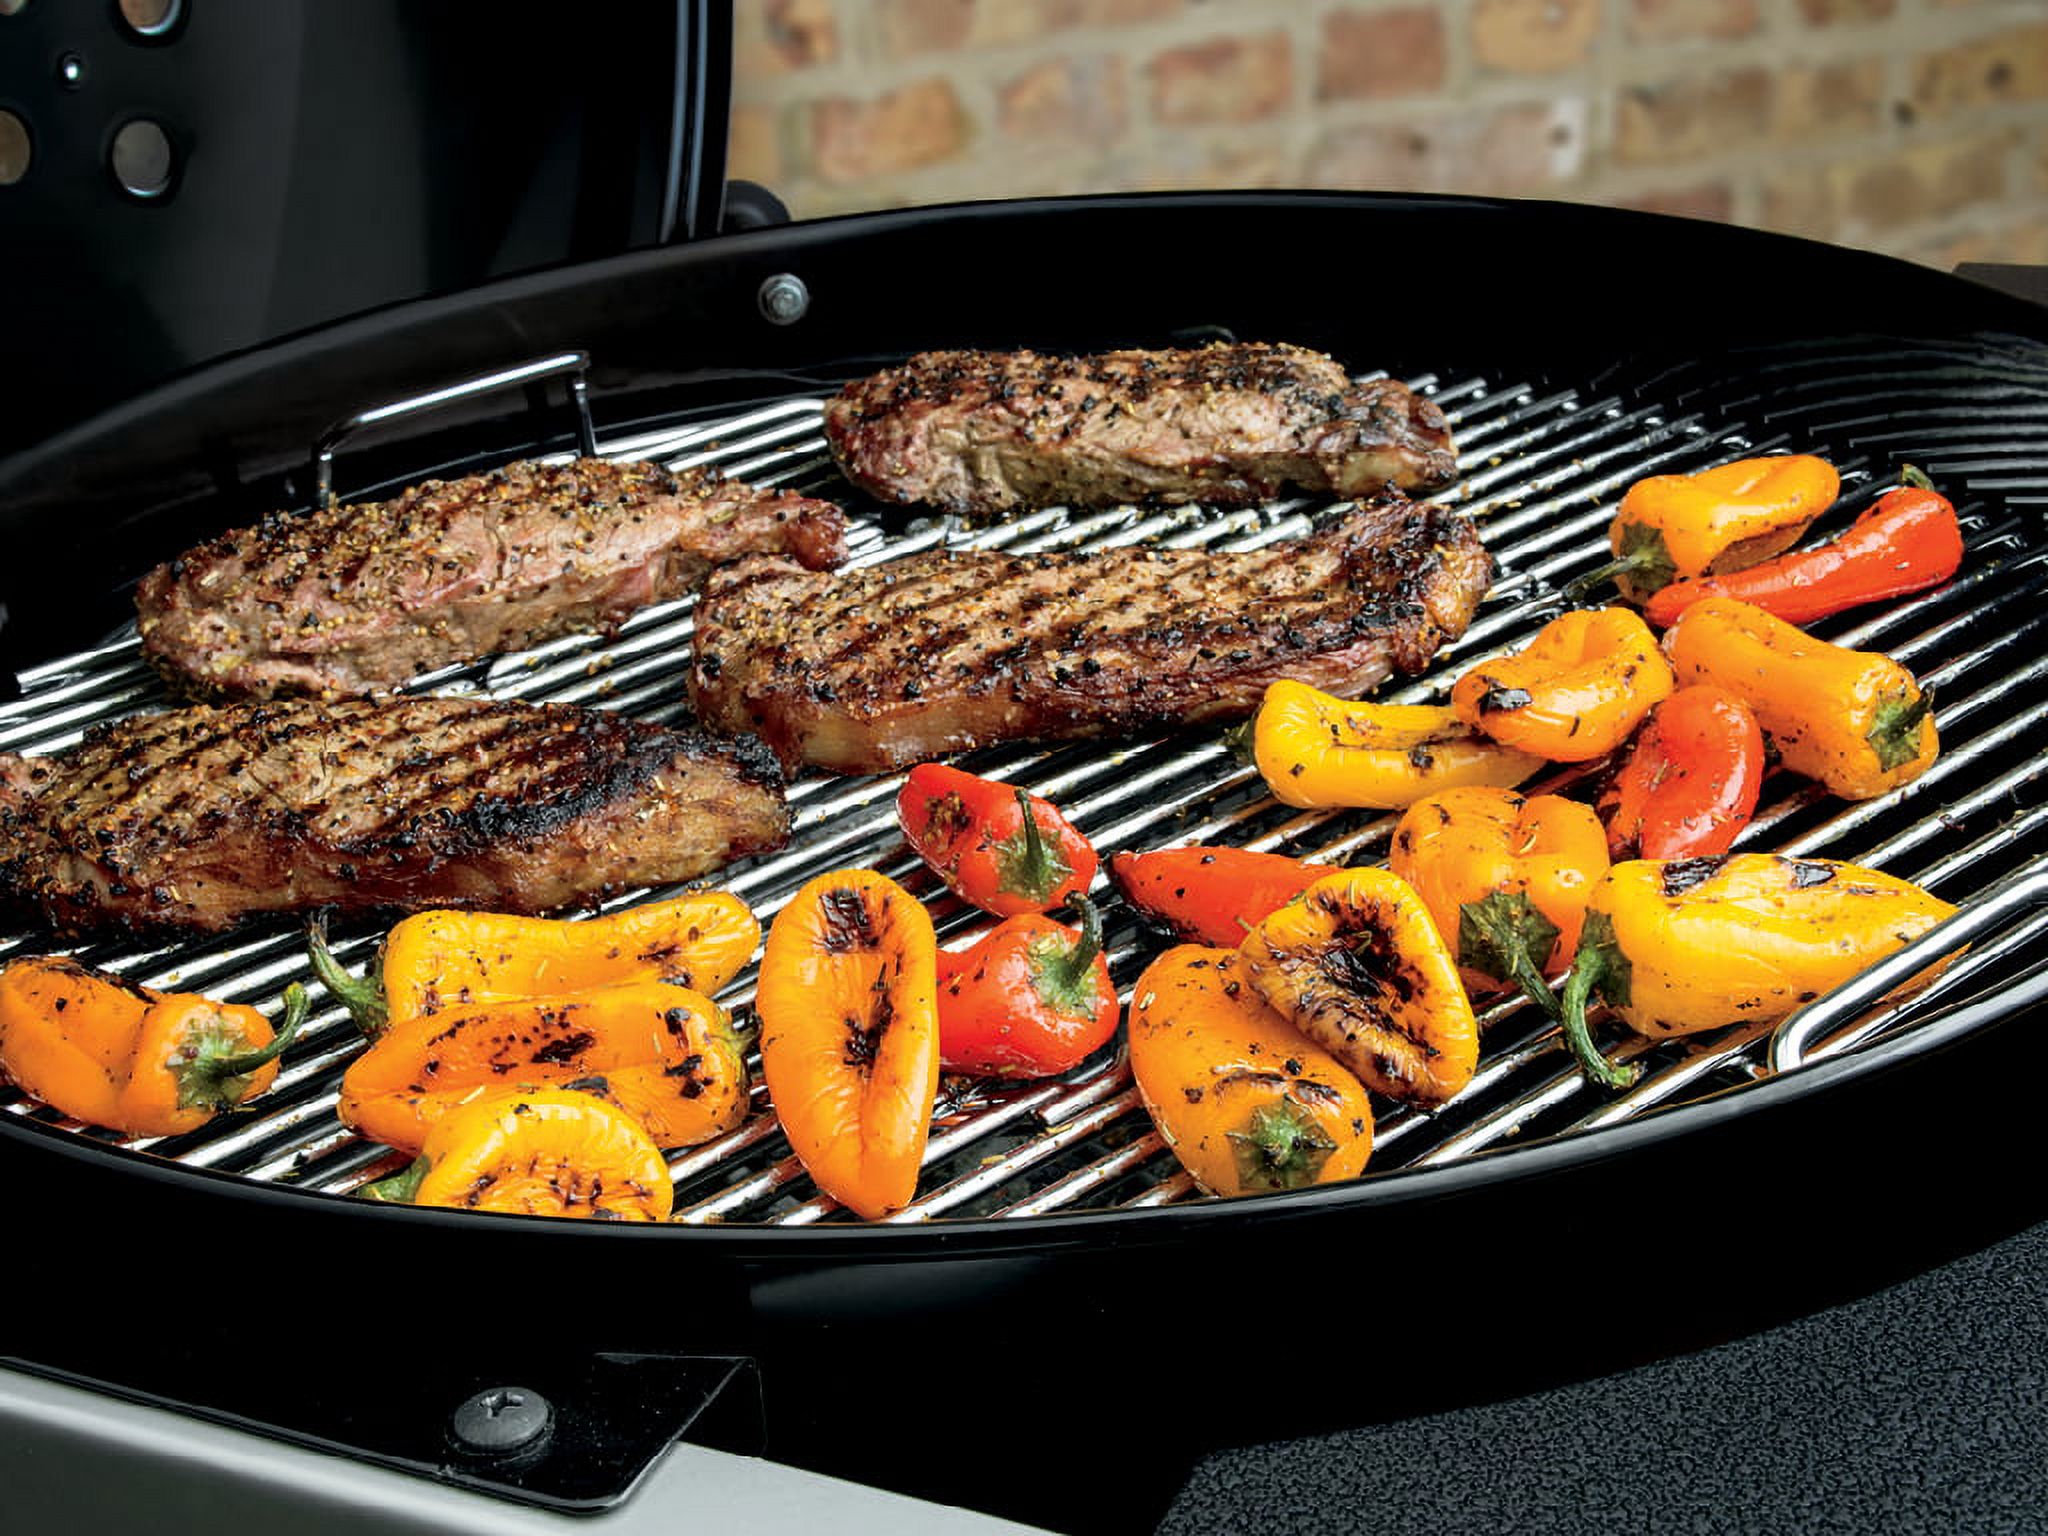 Weber Performer 22" Black Charcoal Grill - image 15 of 16